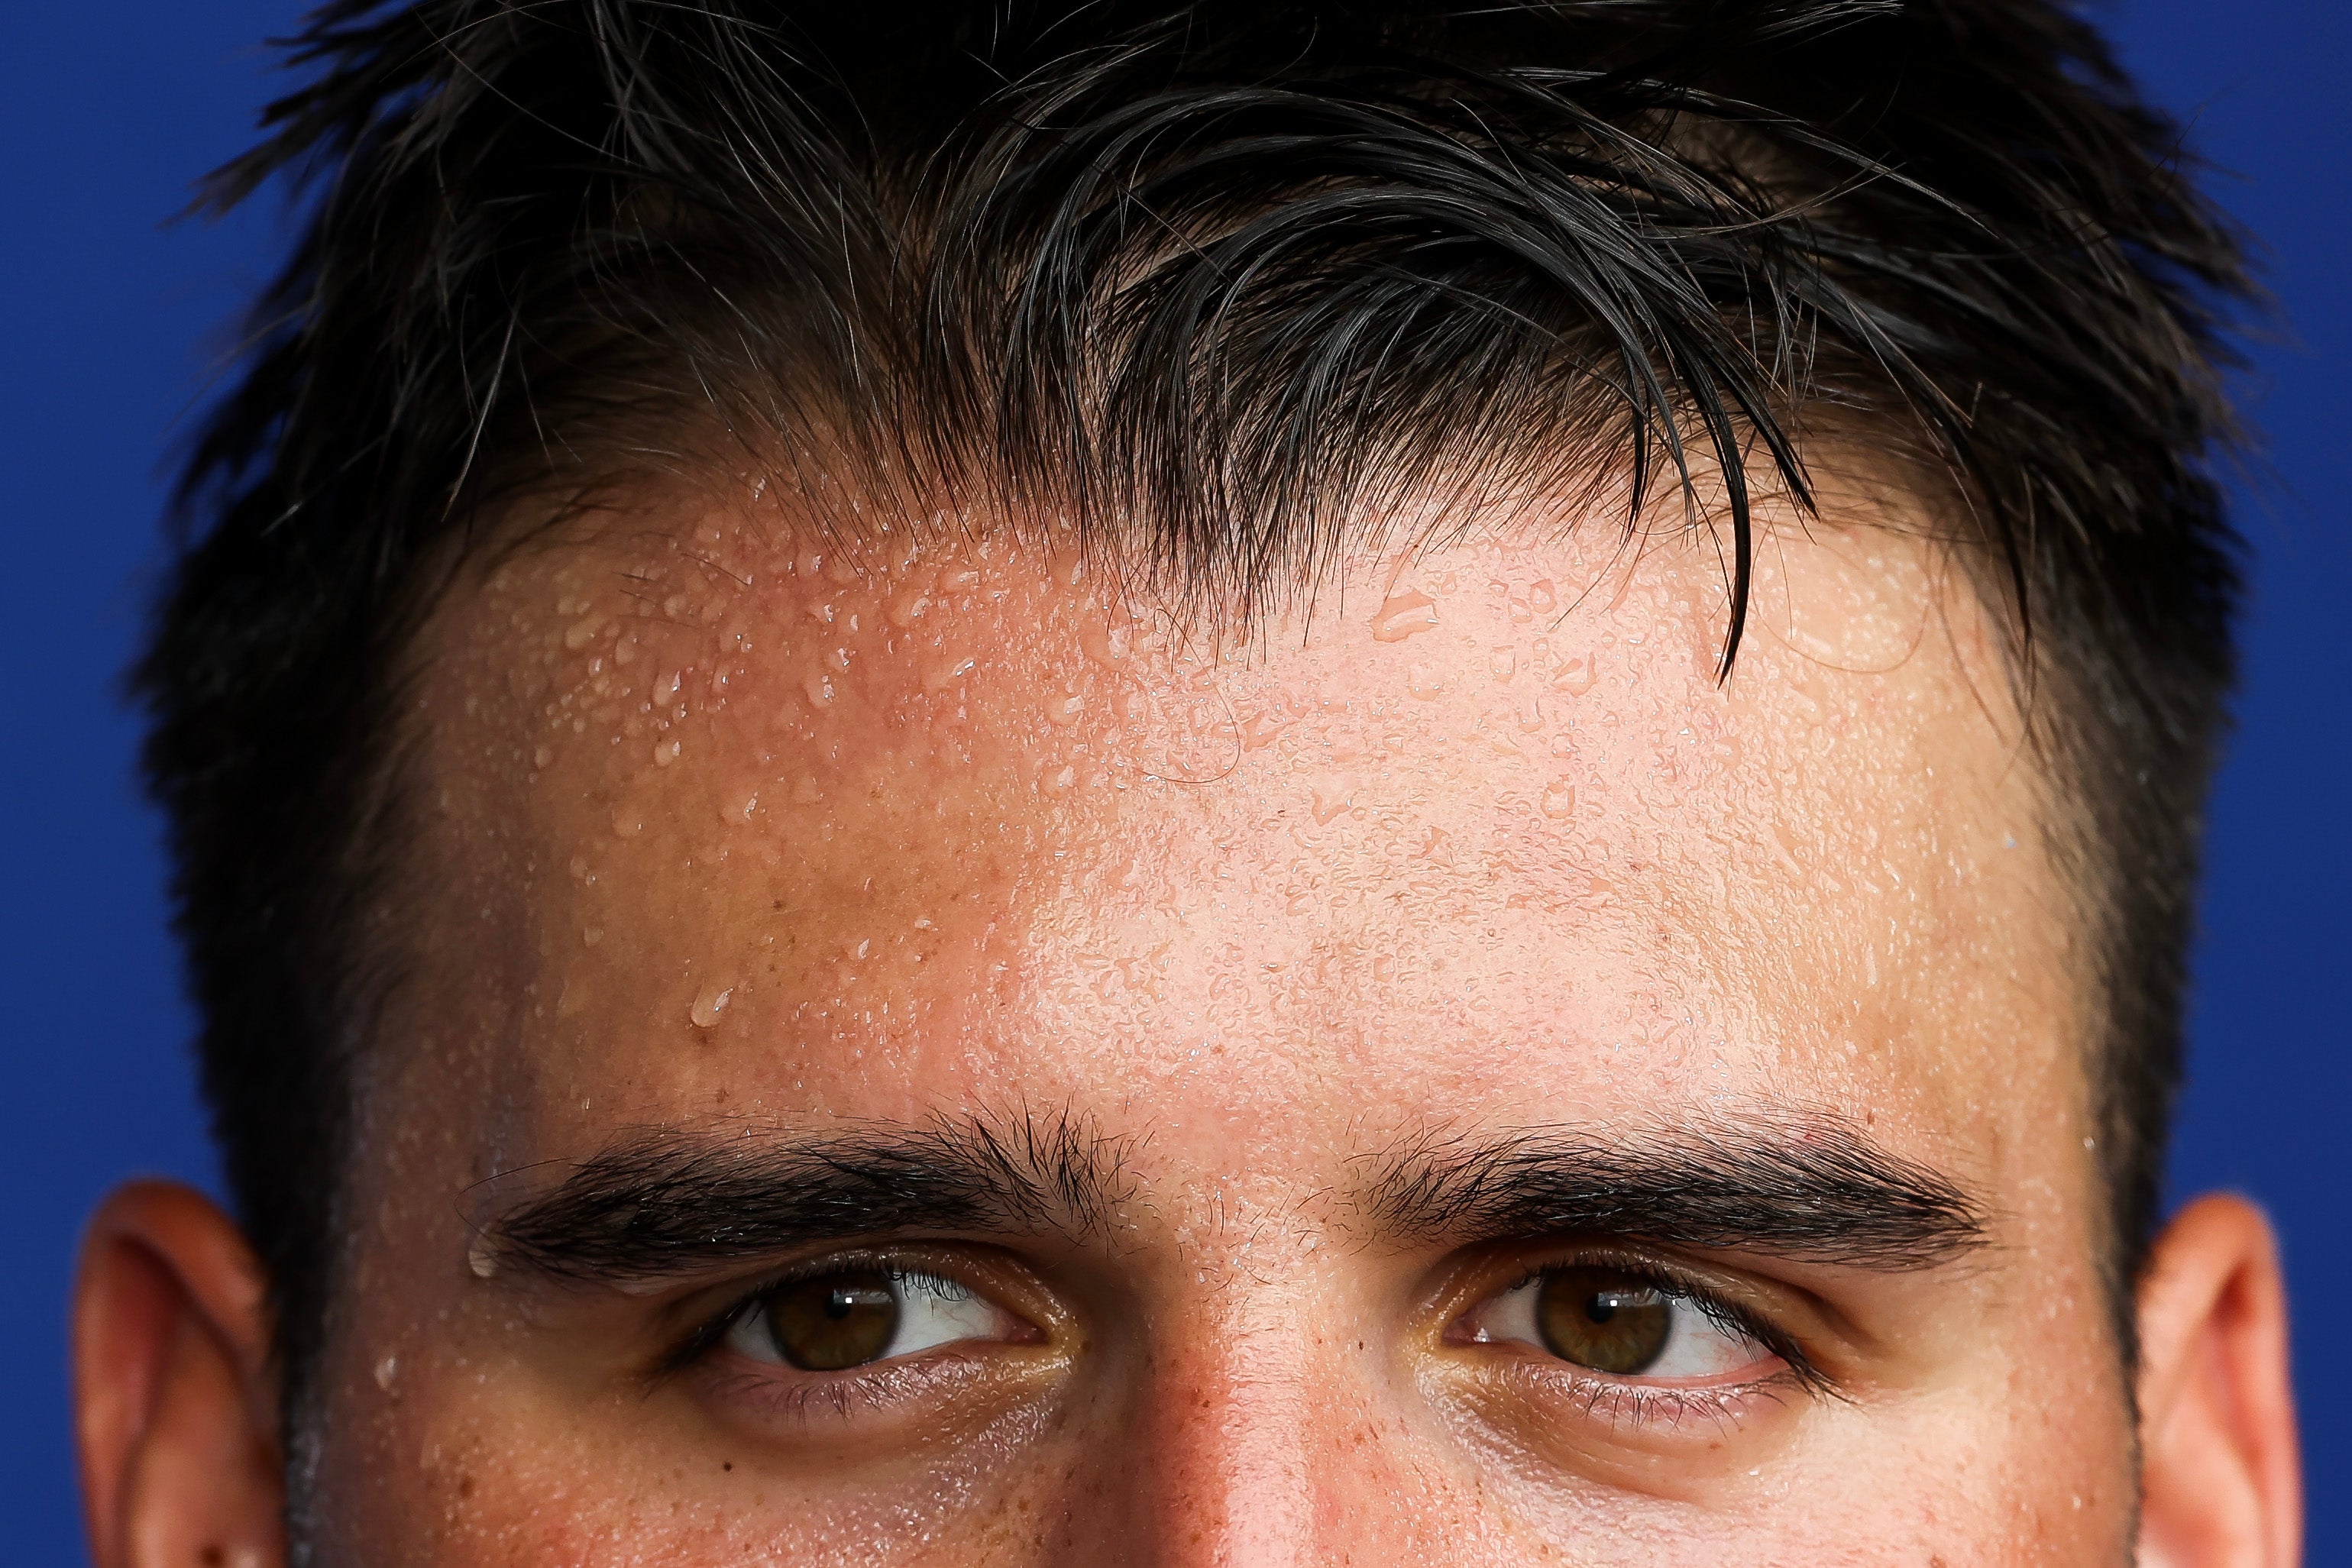 Sweat runs down the forehead of Jon Runyan #76 of the New York Giants, taken after an offseaon workout during New York’s heatwave